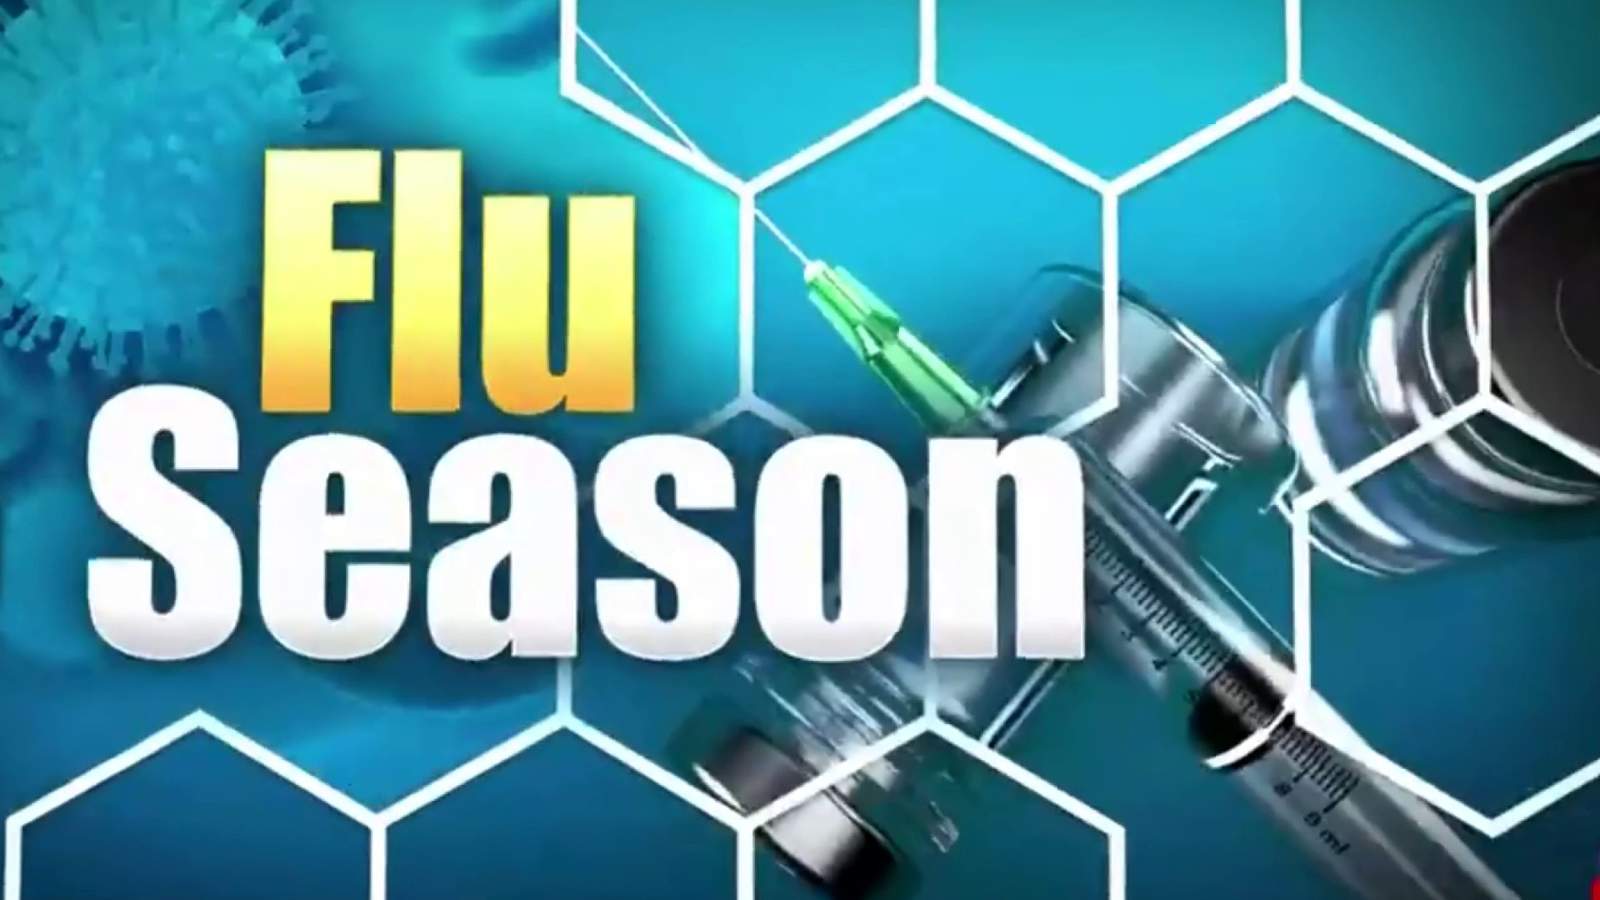 This flu season could be worst in decades: Facts and symptoms